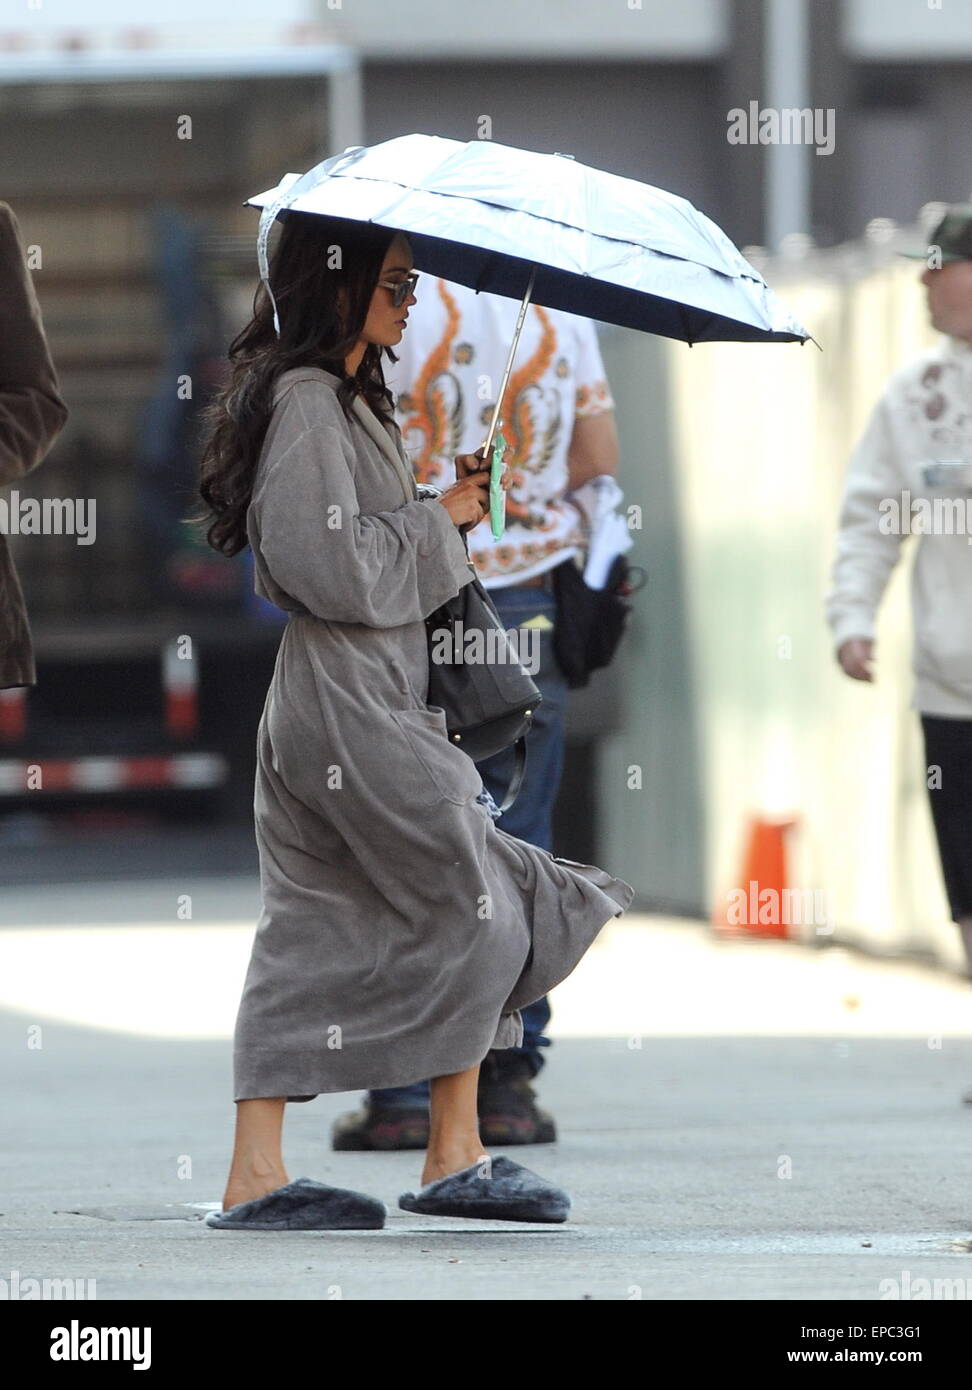 Actress Megan Fox spotted wearing a robe on the set of 'Zeroville' filming in downtown Los Angeles.  Featuring: Megan Fox Where: Los Angeles, California, United States When: 10 Nov 2014 Credit: Cousart/JFXimages/WENN.com Stock Photo